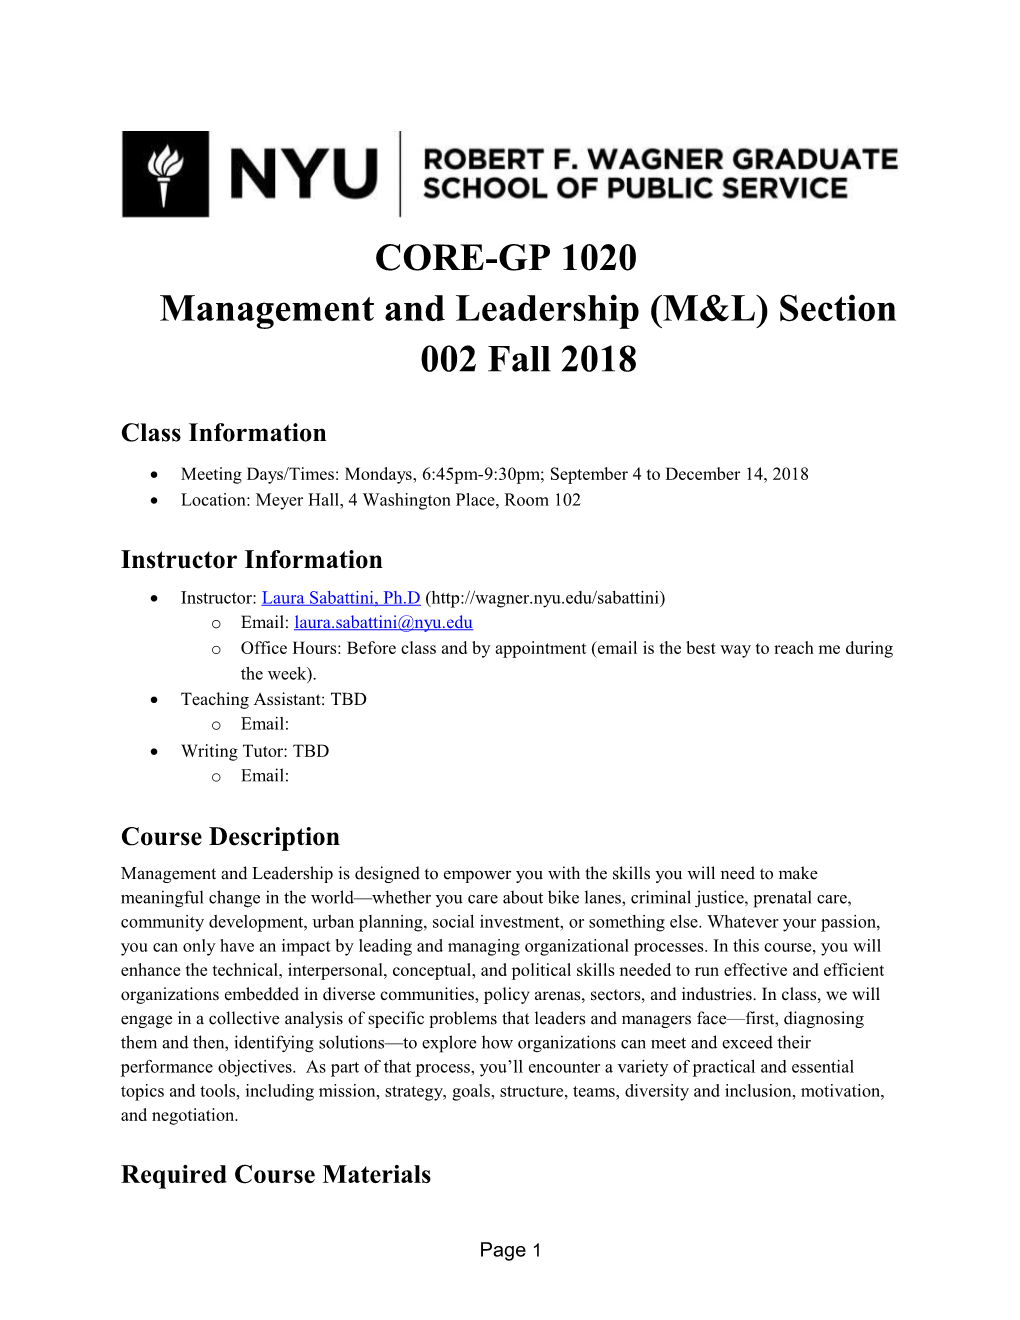 CORE-GP 1020Management and Leadership (M&L) Section 002 Fall 2018